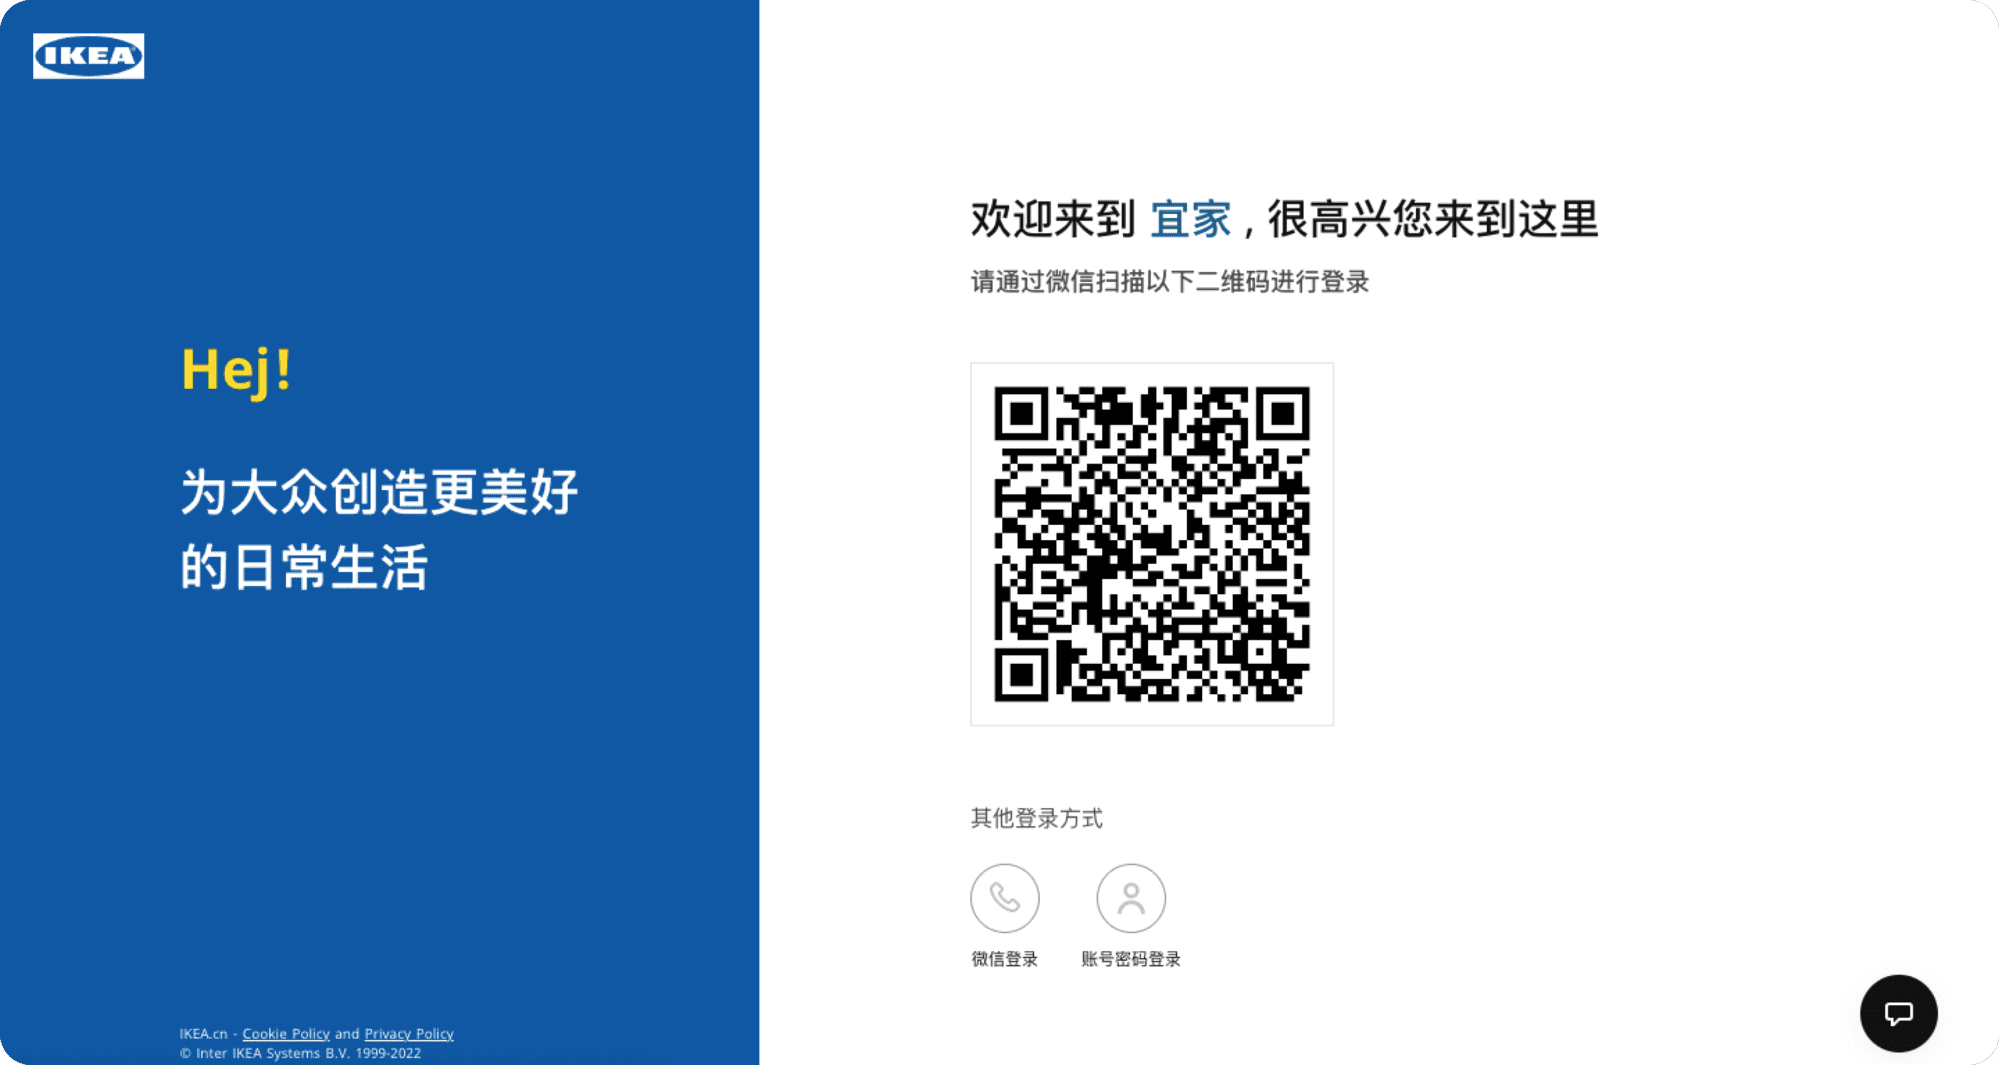 IKEA China website allows users to log in using their WeChat account